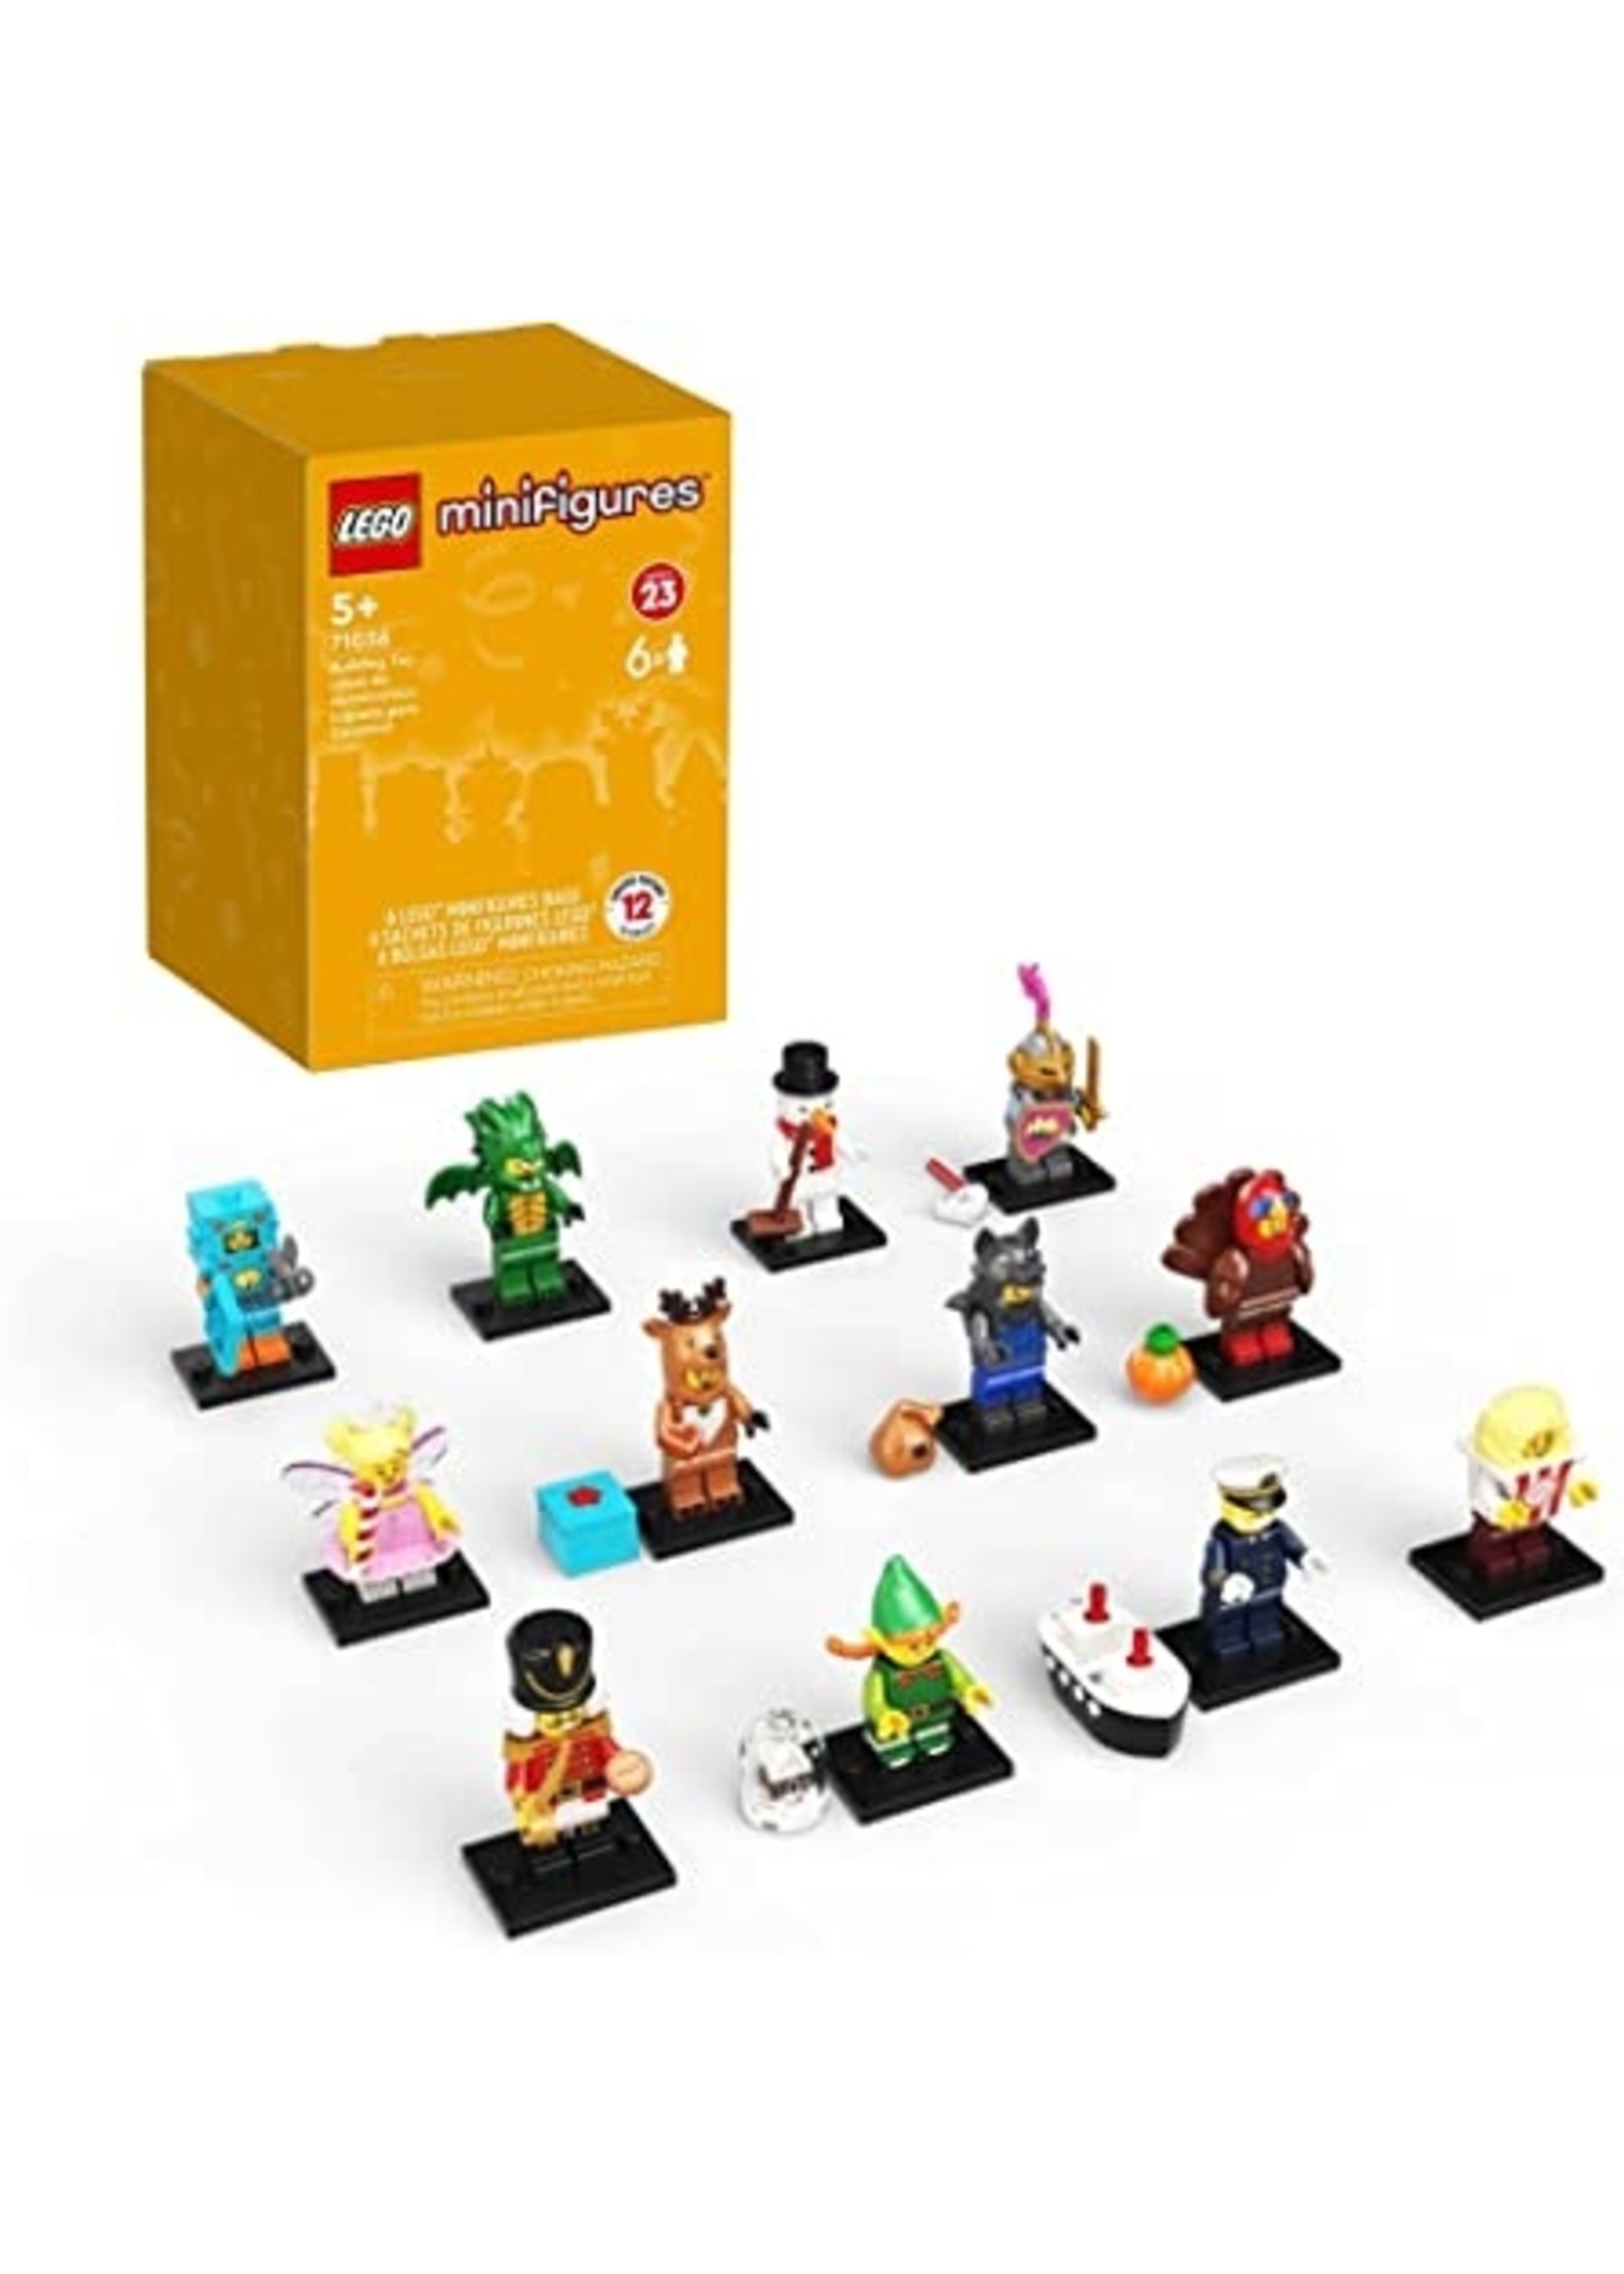 LEGO Minifigures Series 23 6 pack